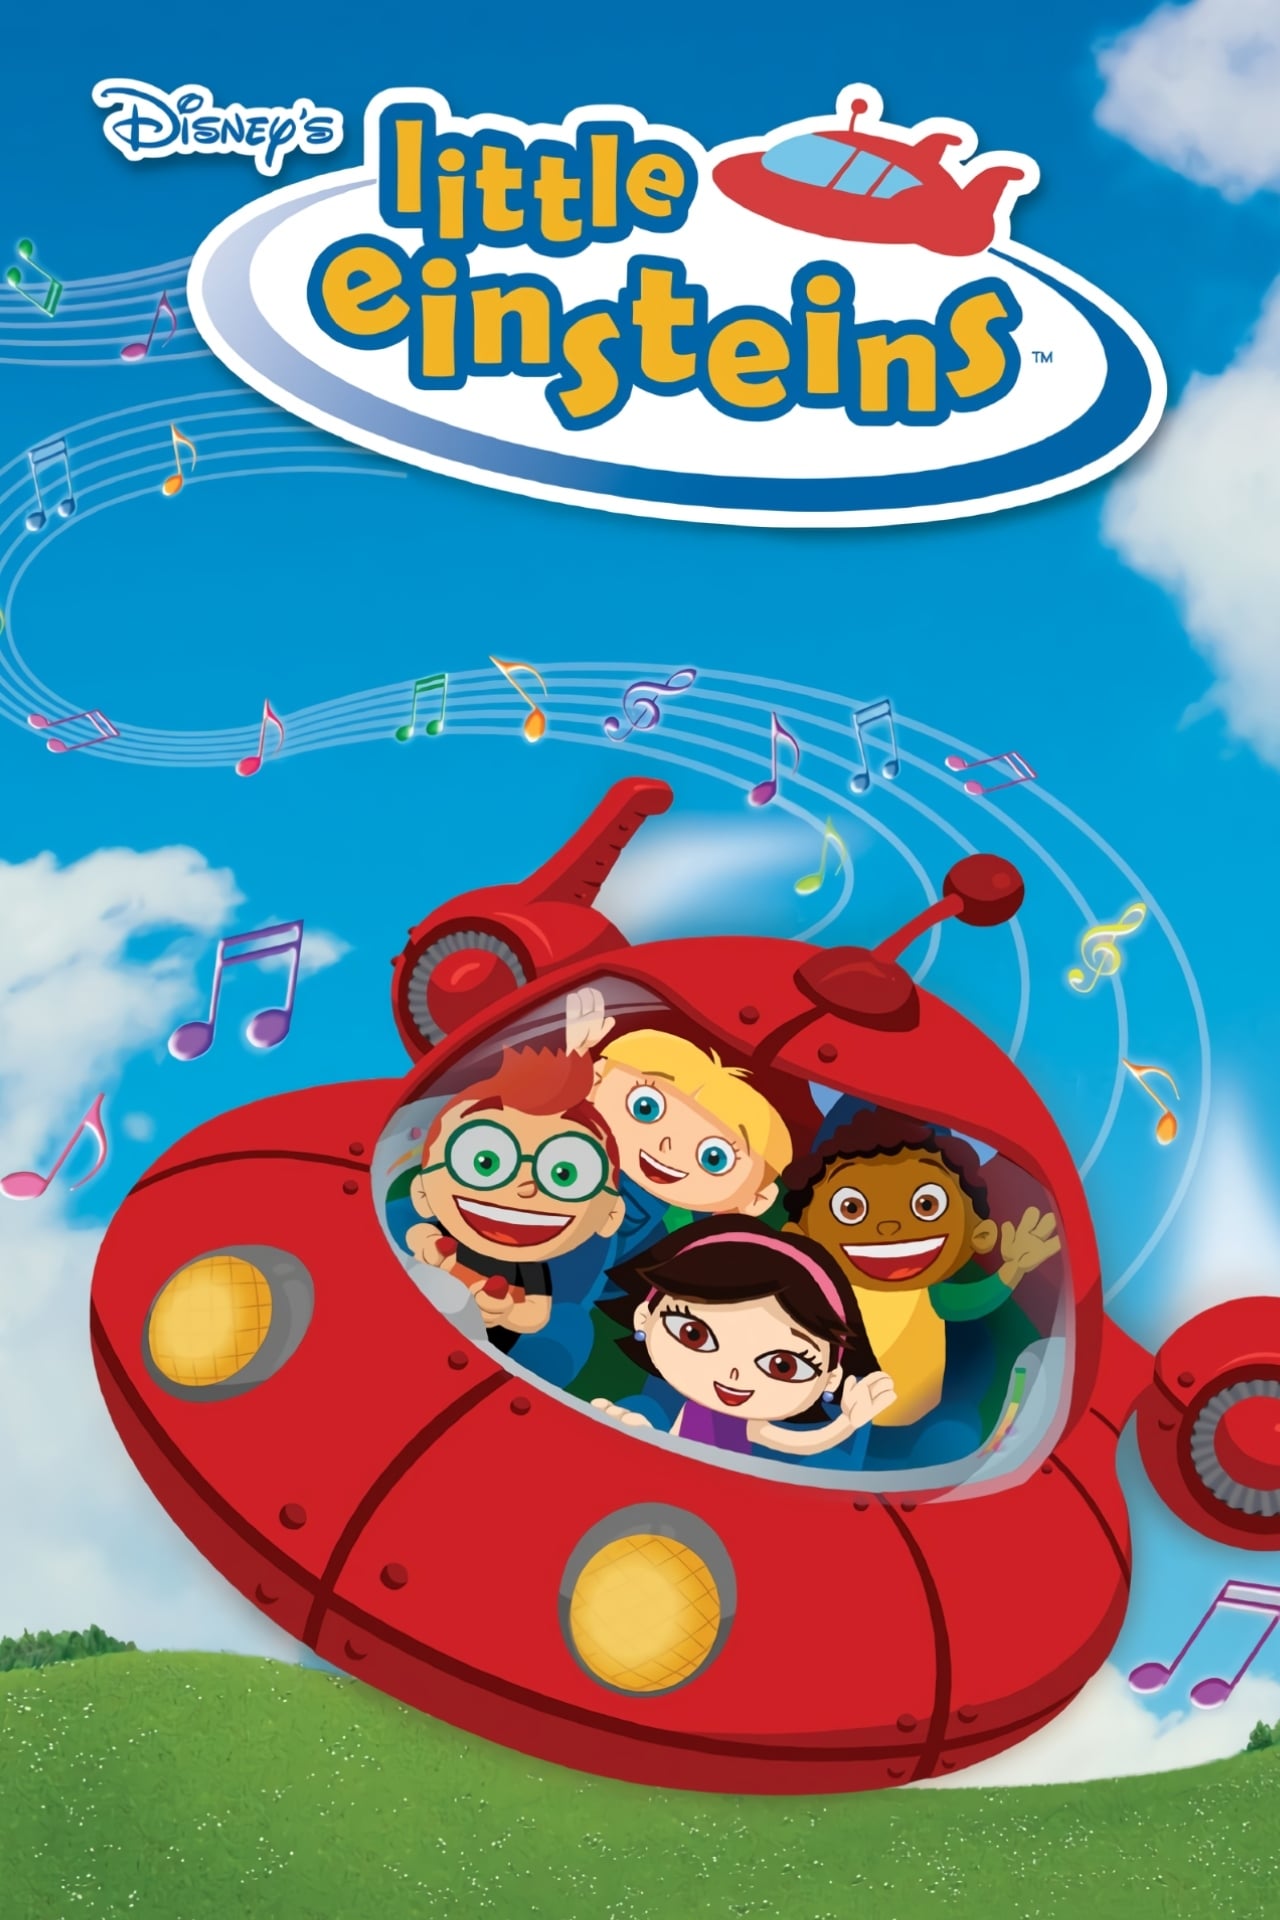 Little Einsteins TV Shows About Classical Music